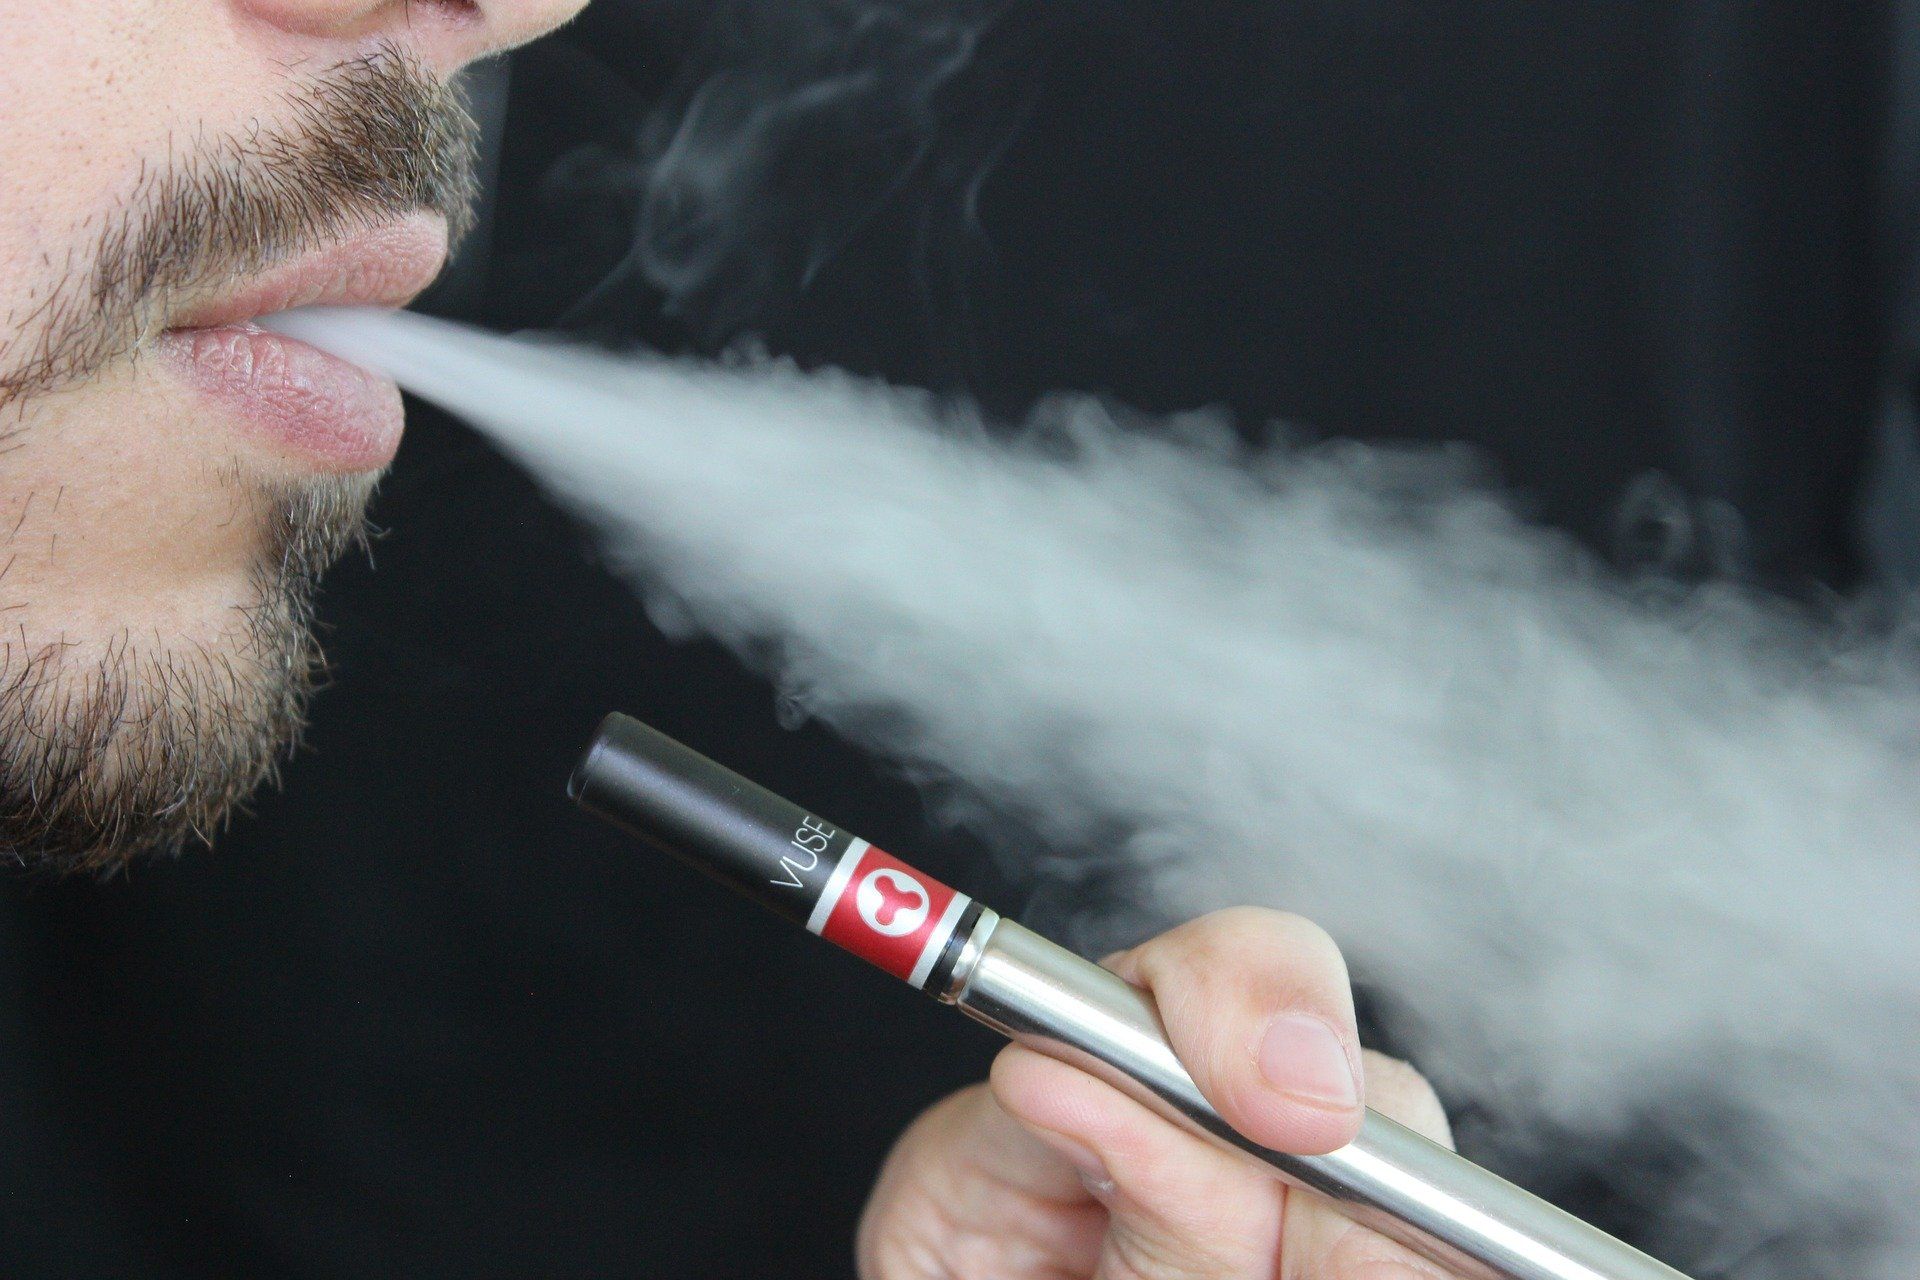 Man vaping an e-cigarette with nicotine